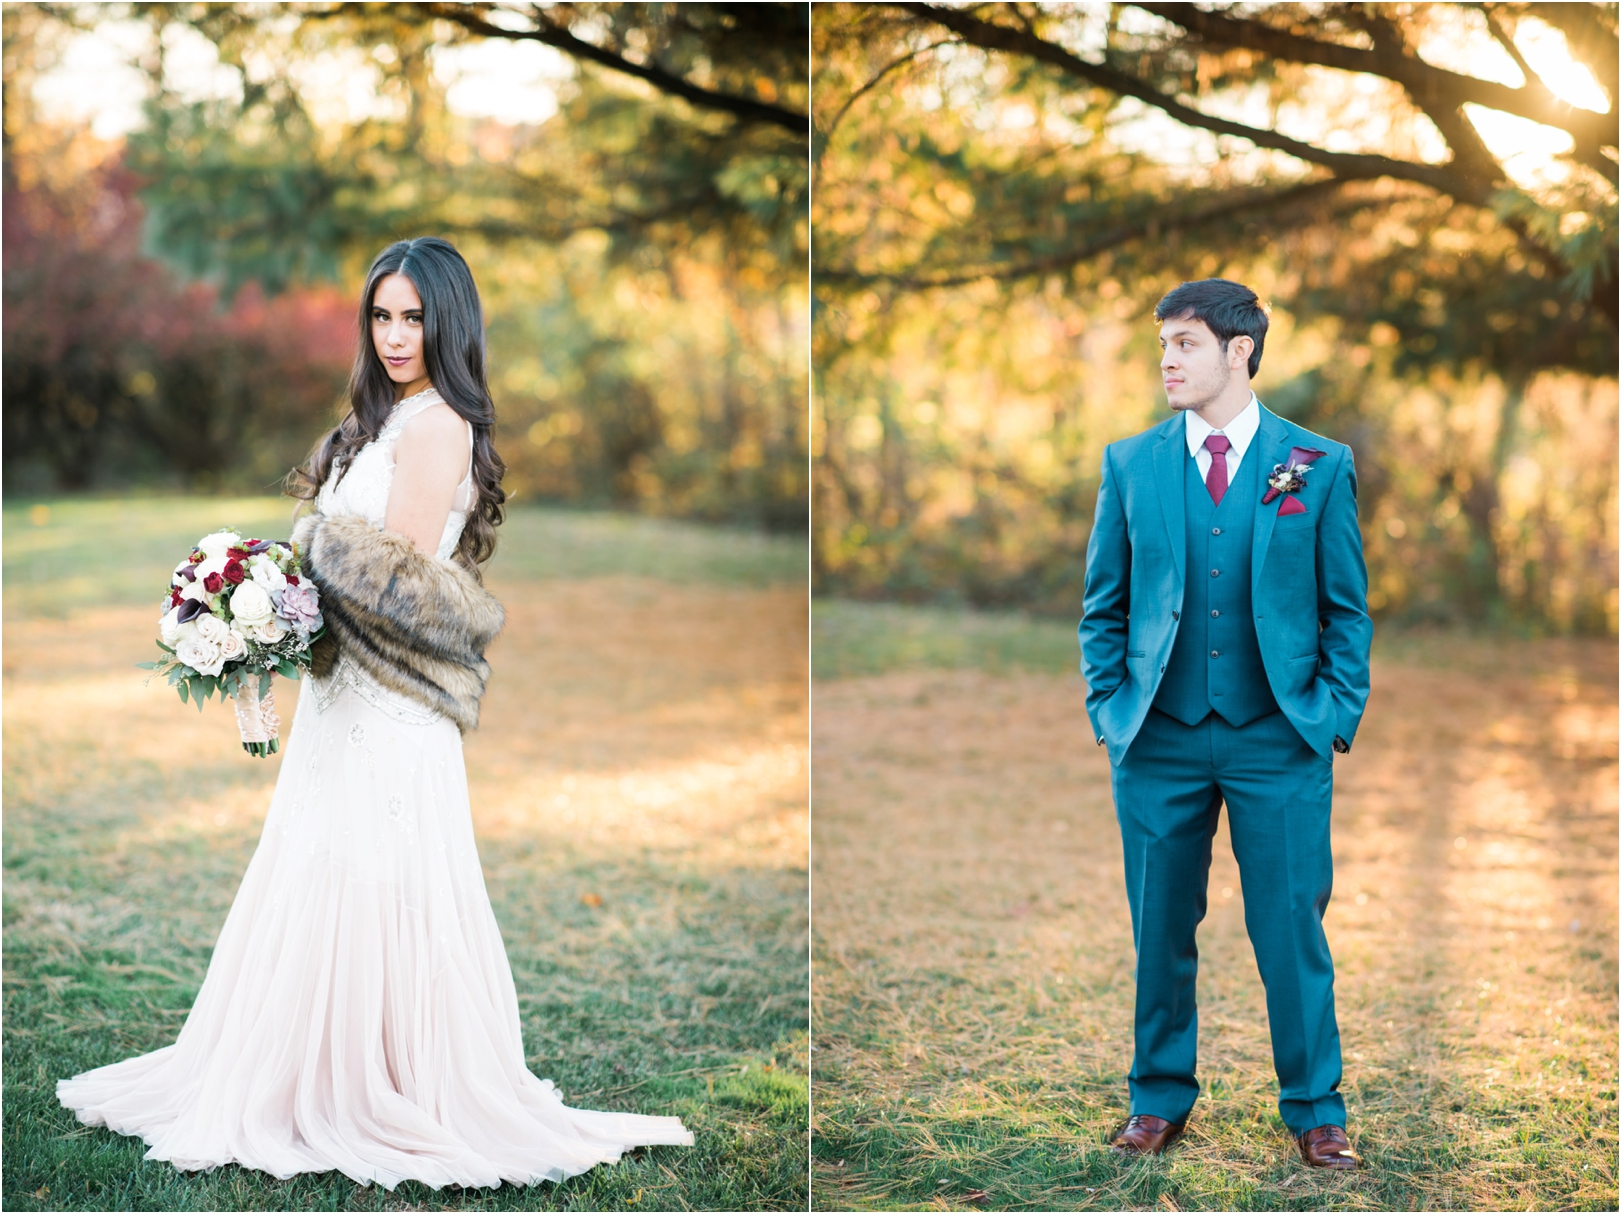 Fall wedding in Maryland by Joy Michelle Photography